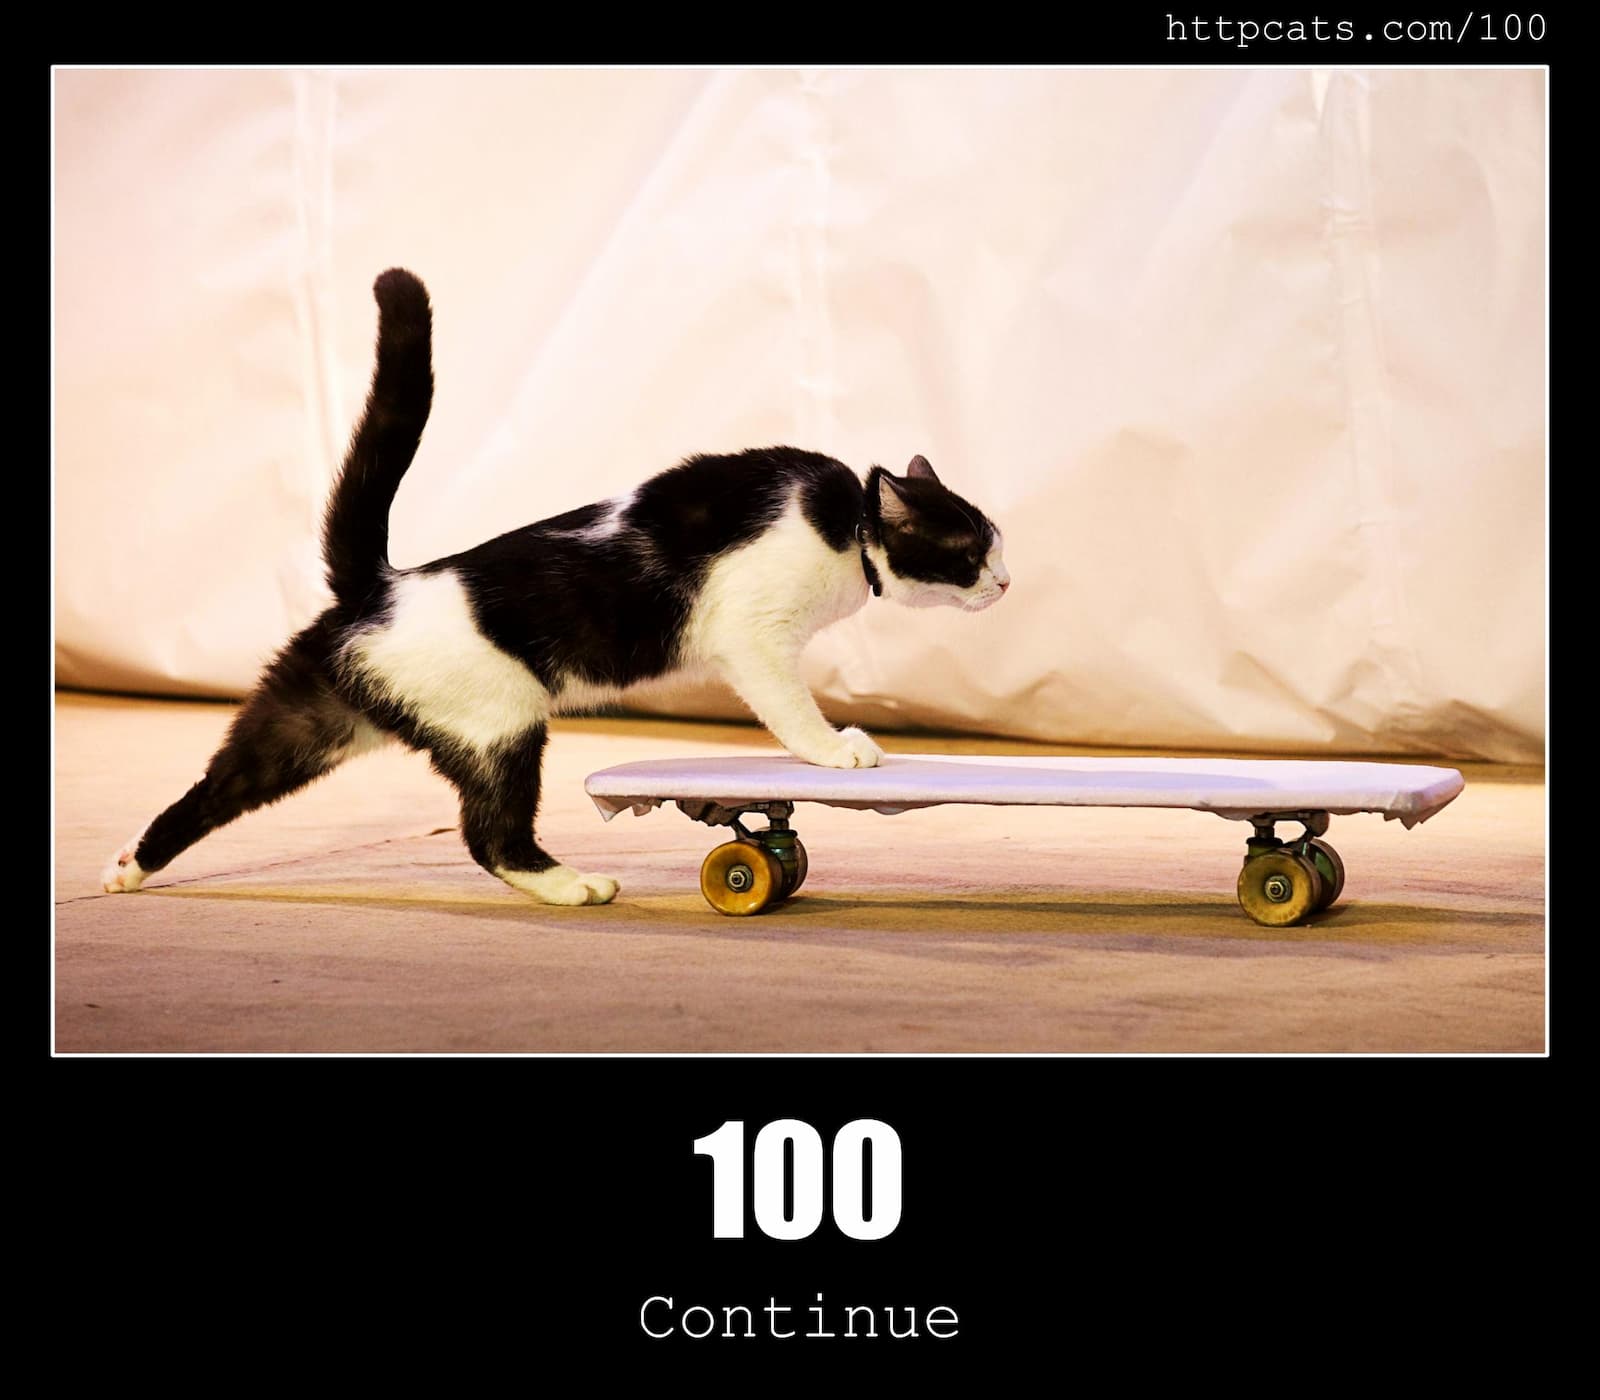 HTTP Status Code 100 Continue & Cats